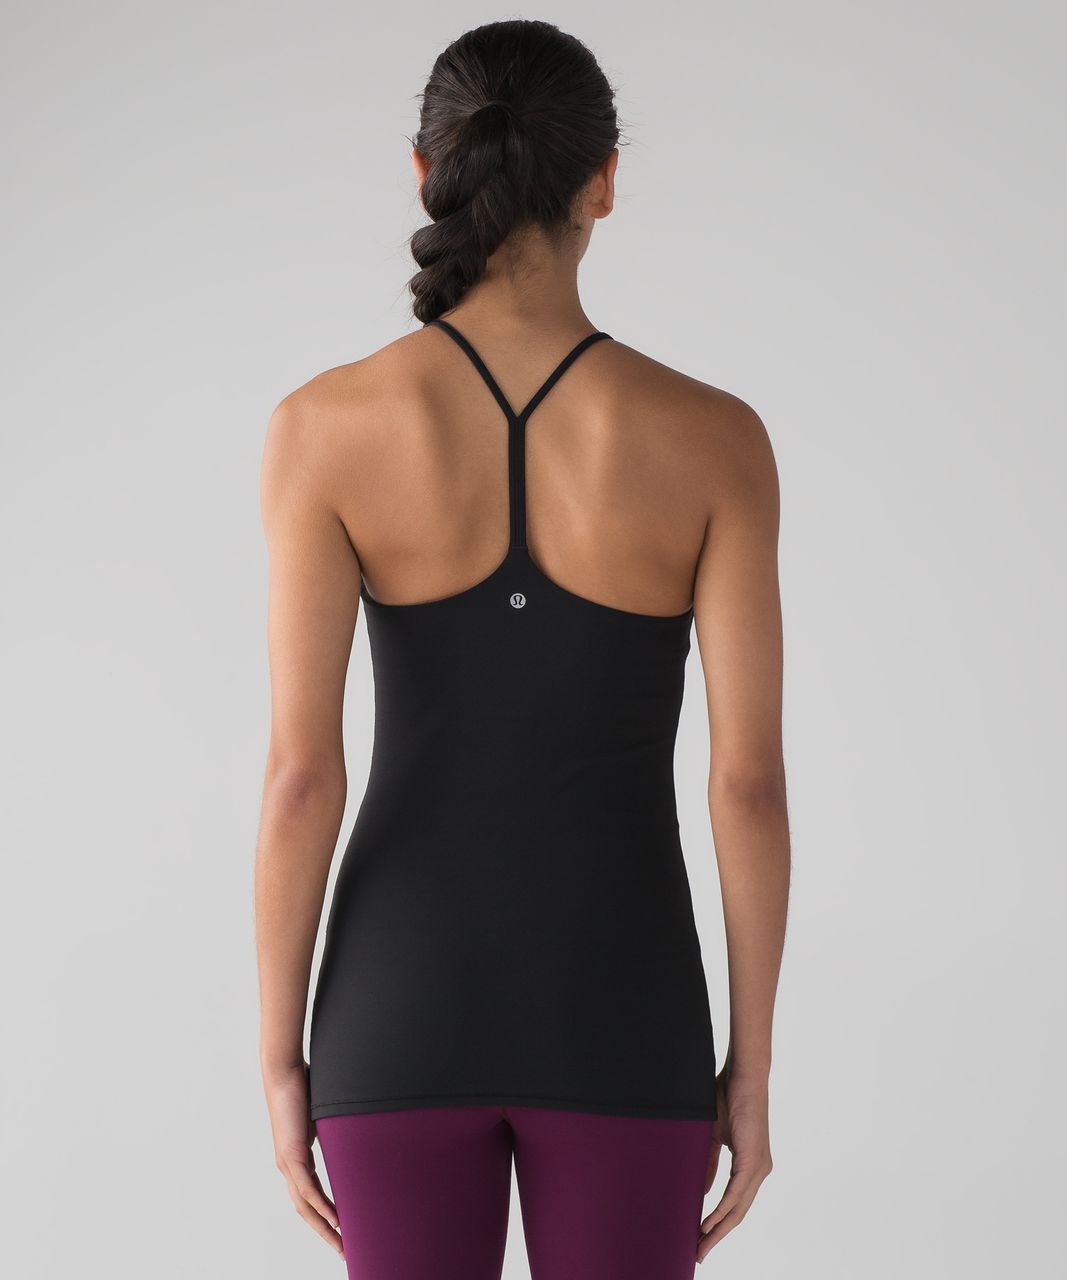 Anyone have this top and can provide a review? Sun setter tank